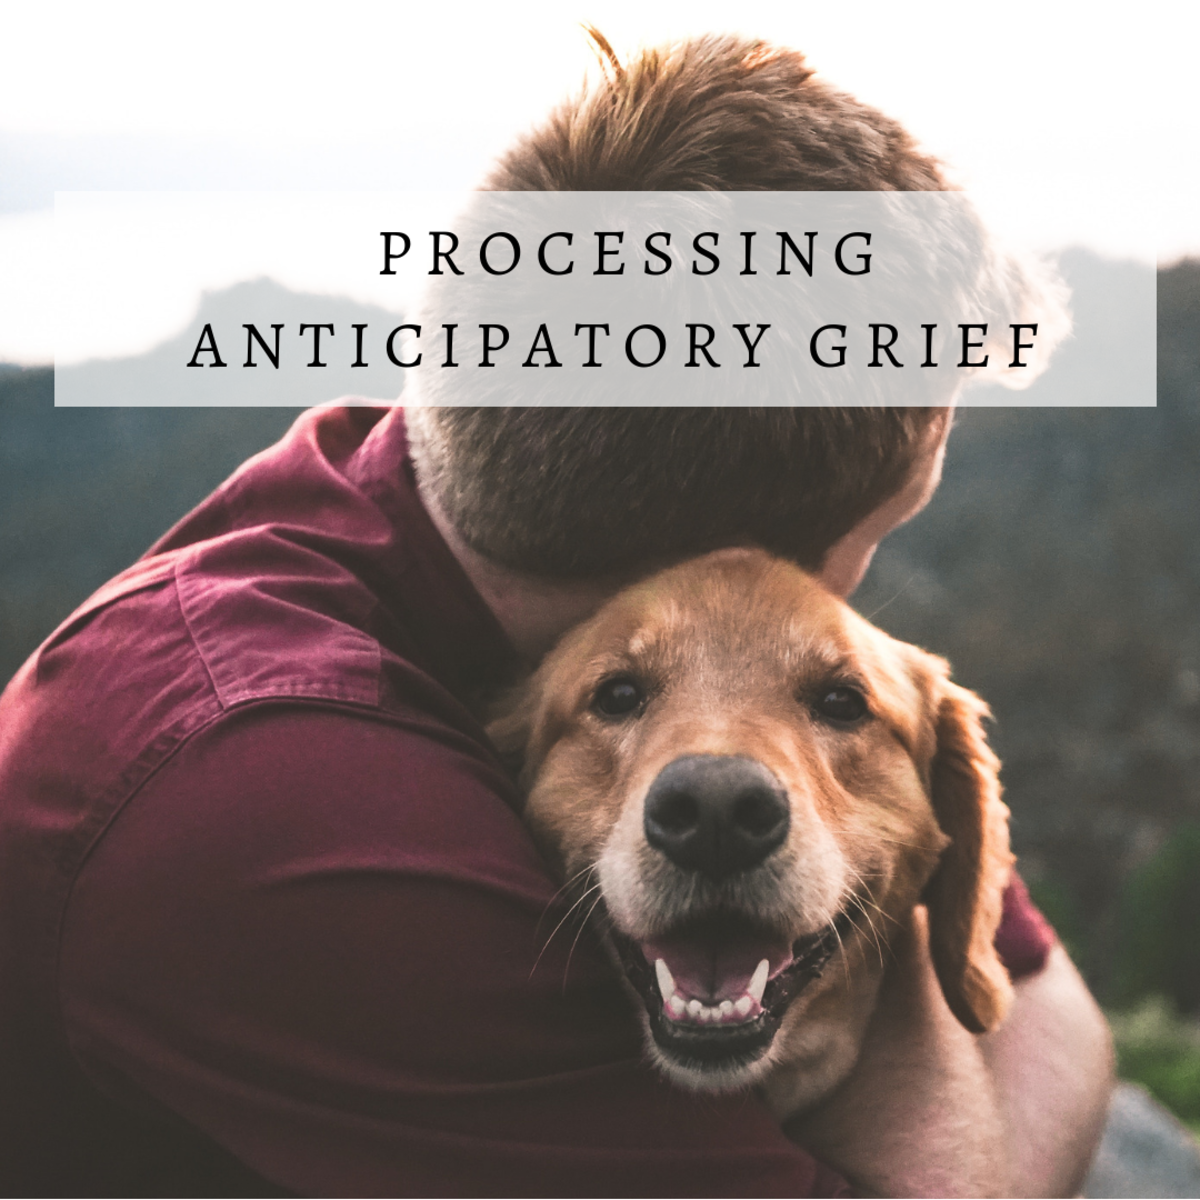 Anticipatory grief is common when dealing with terminal illness. 